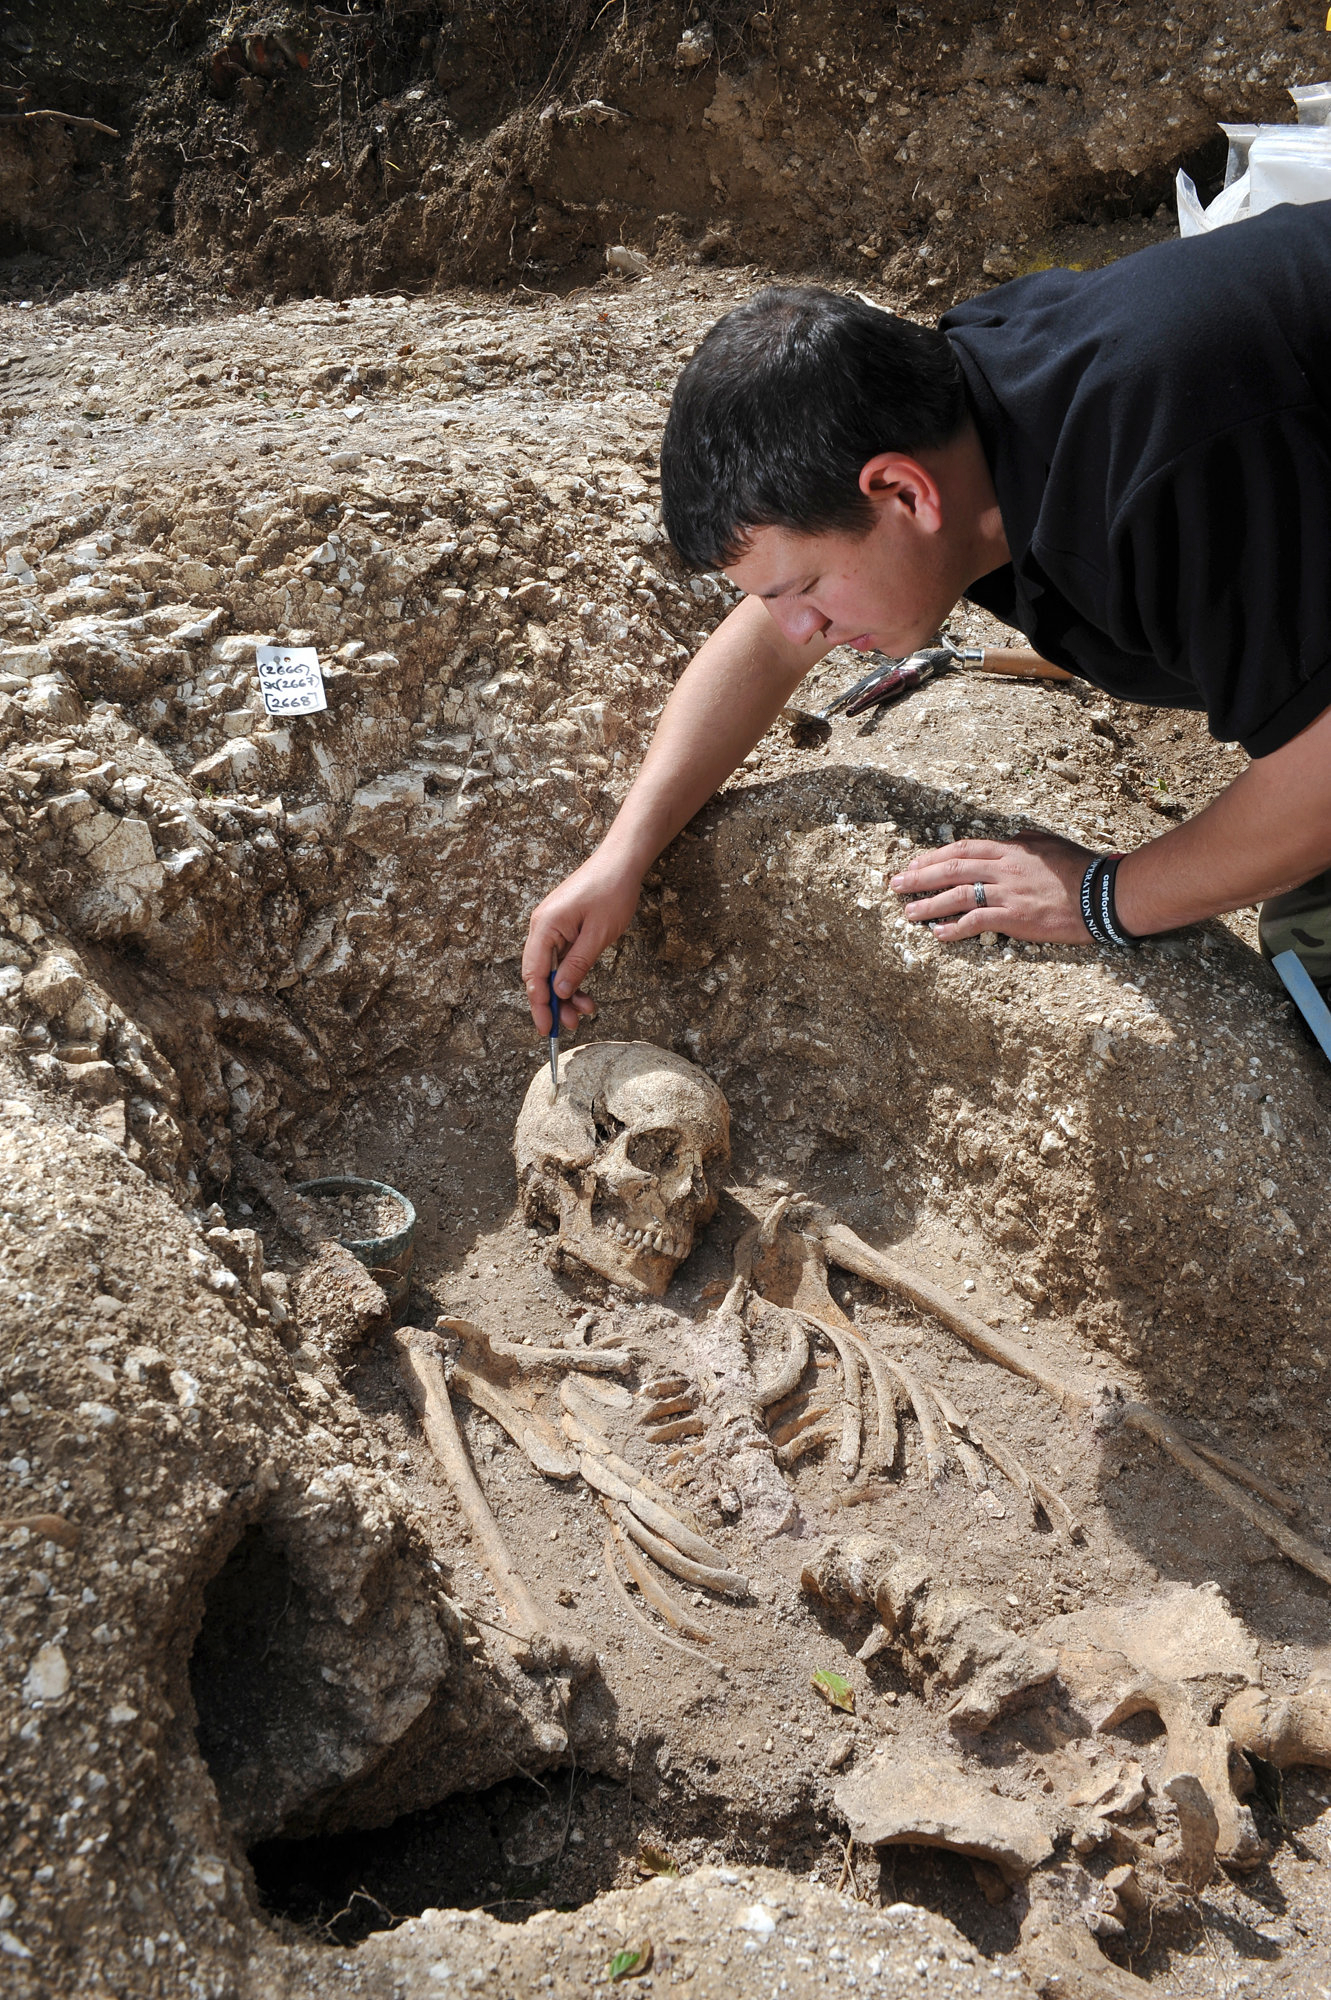 Personnel excavating an archeological dig site, unearthing a skeleton.